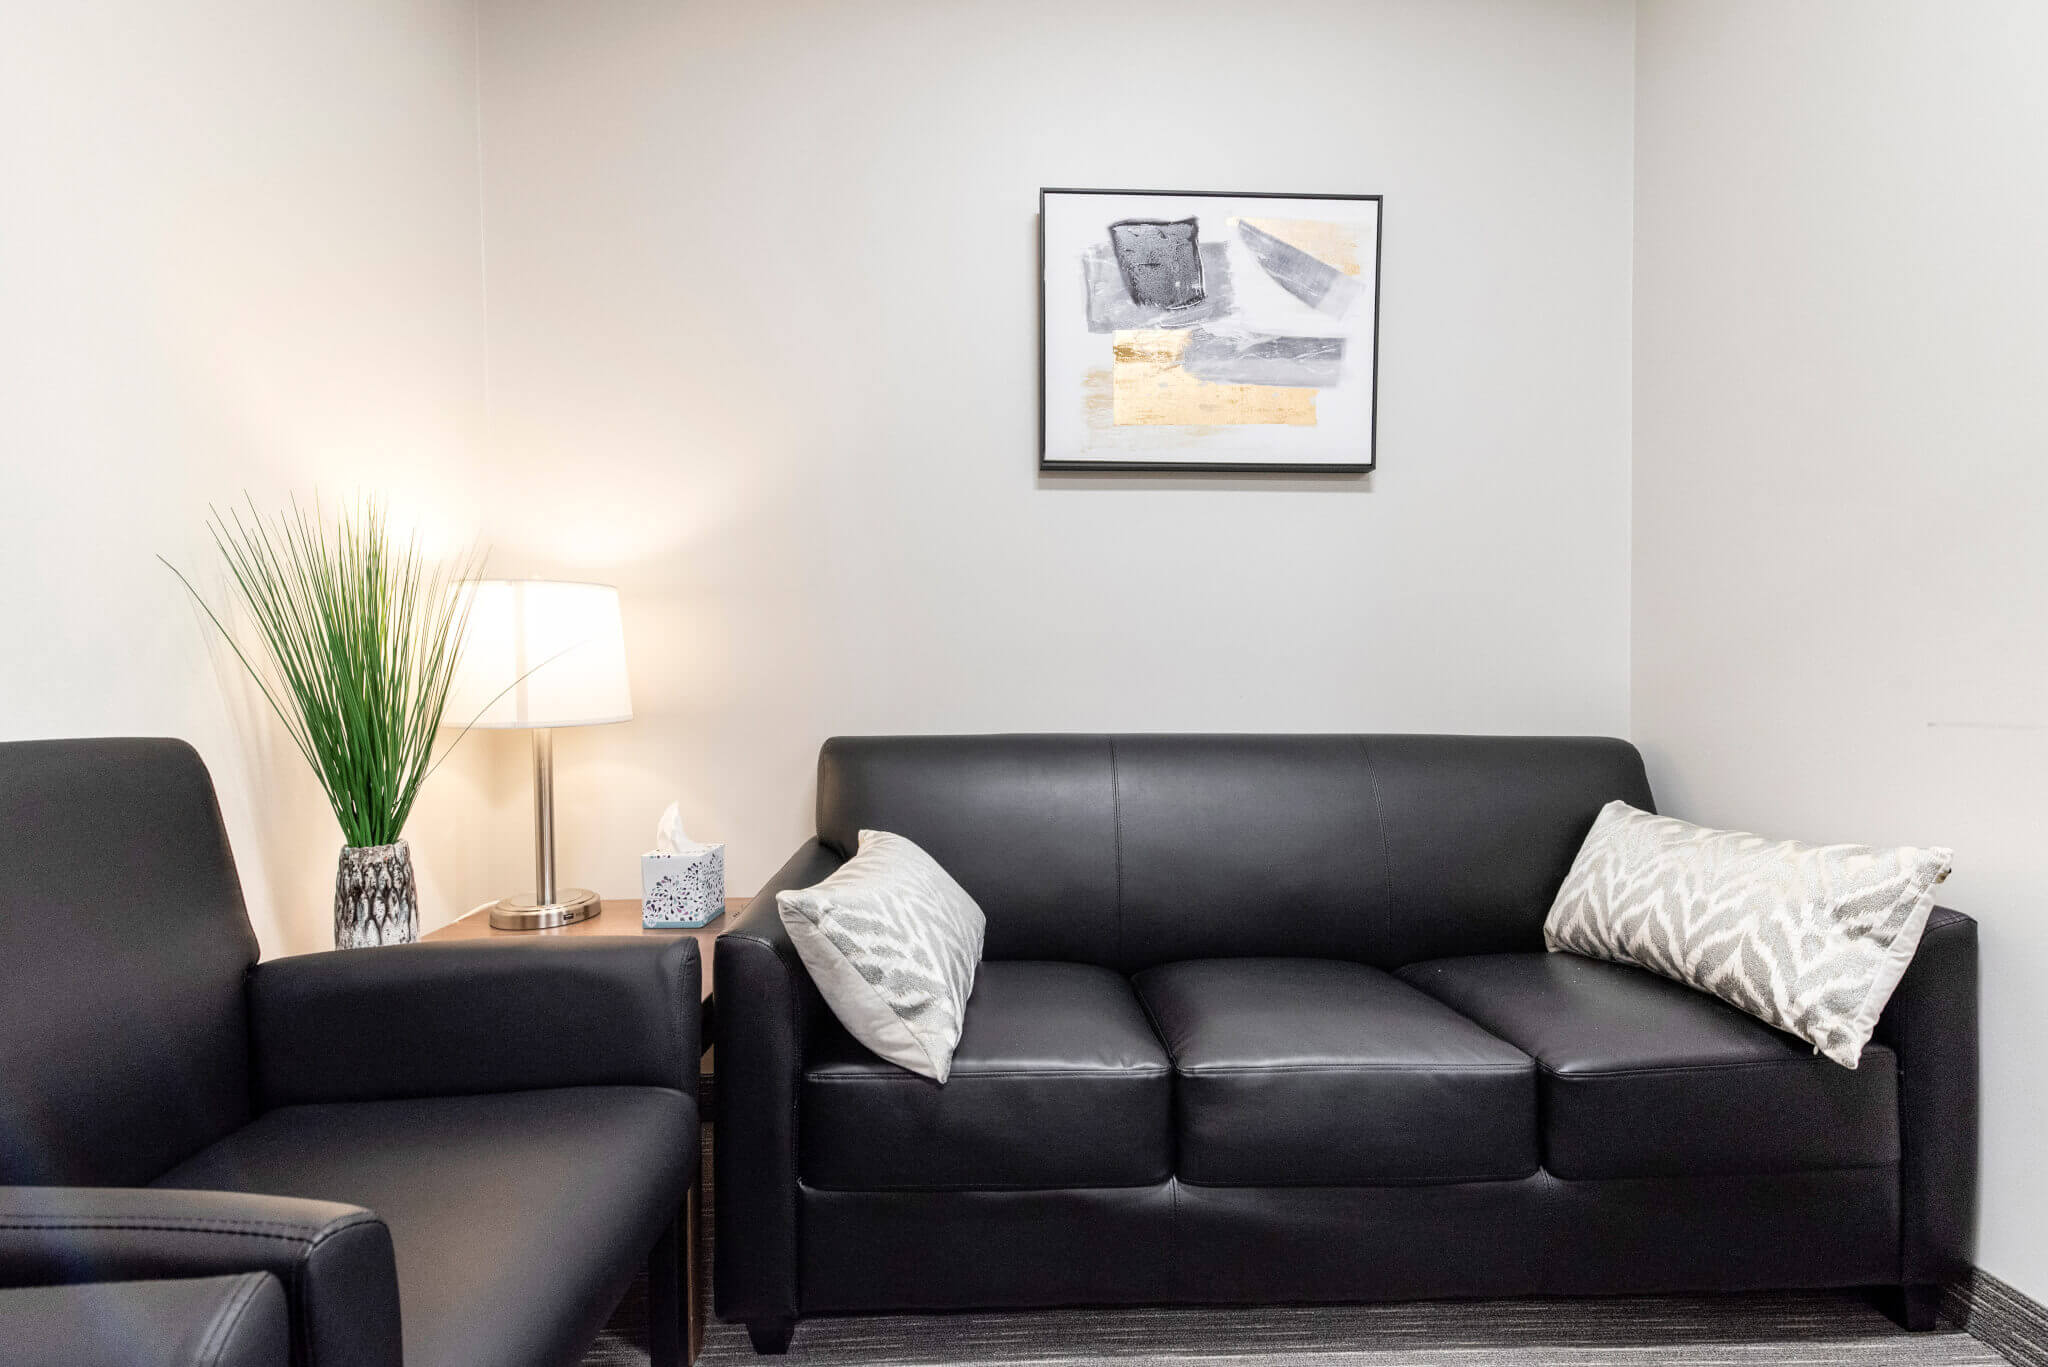 Glpg Great Lakes Psychology Group Counseling Therapy Schaumburg Illinois Waiting Area